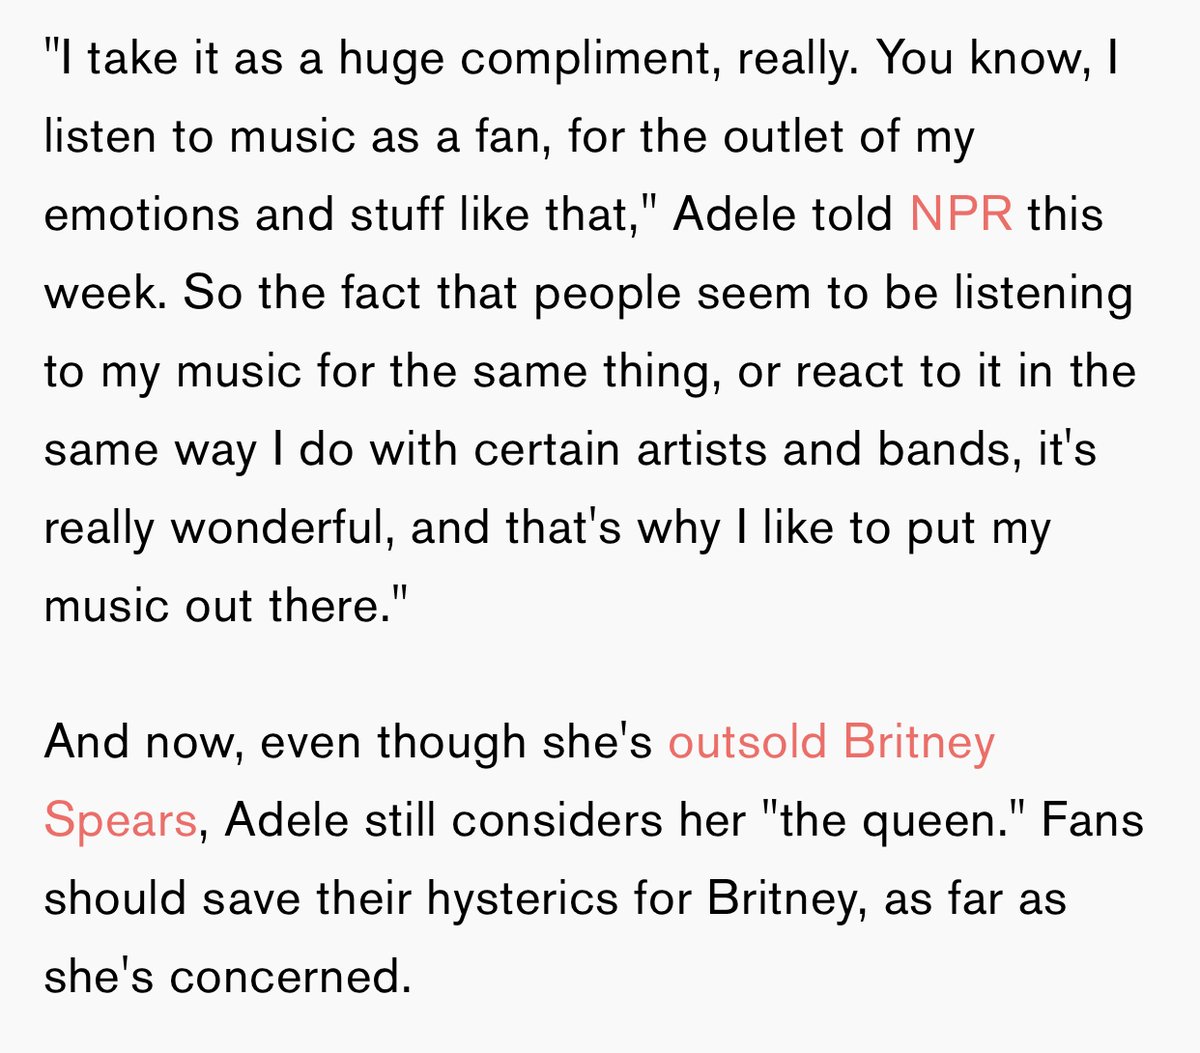 Adele has cited Britney as one of her pop influences. She once cancelled her concert just because Britney had one in the same city and she wanted to see her show.